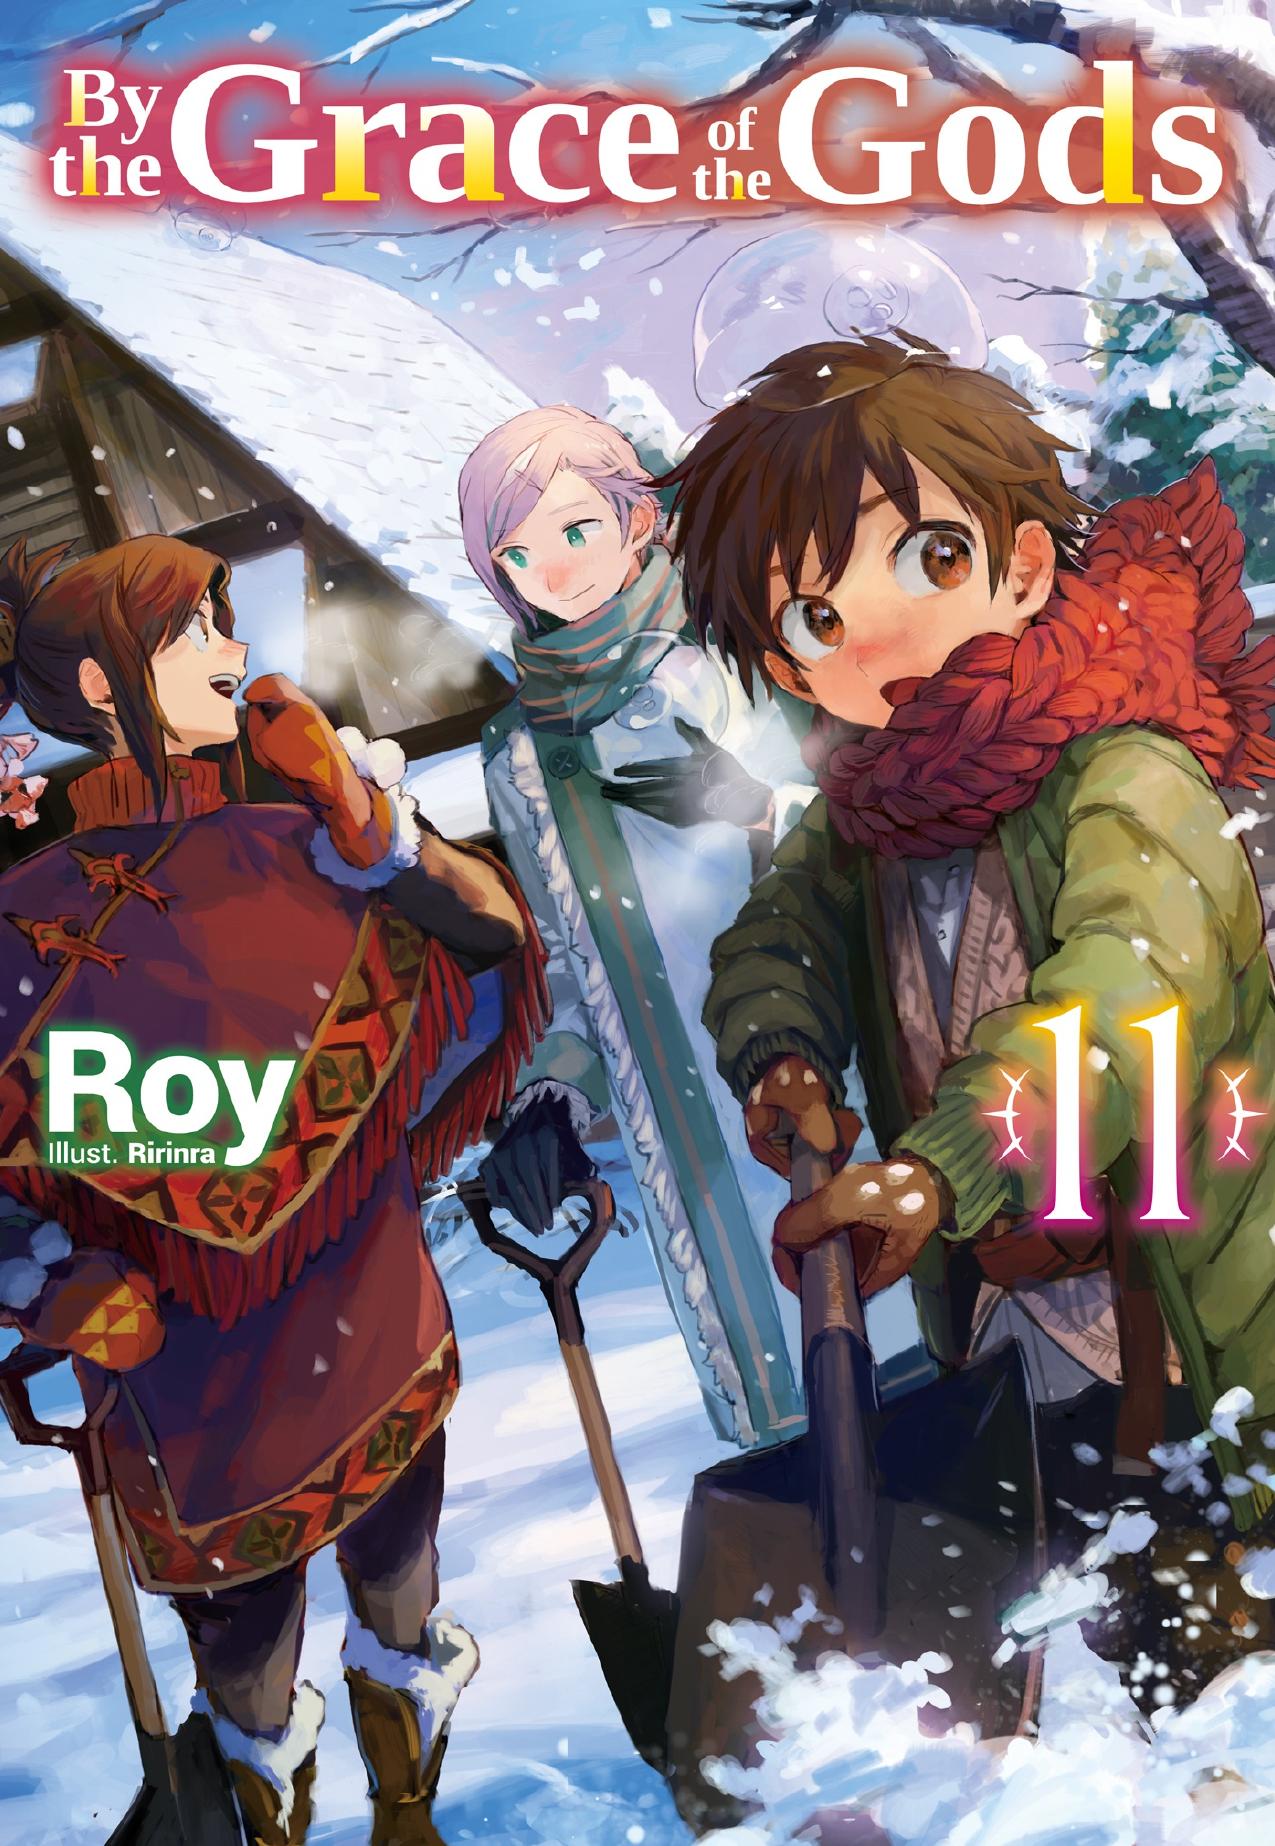 By the Grace of the Gods: Volume 11 by Roy